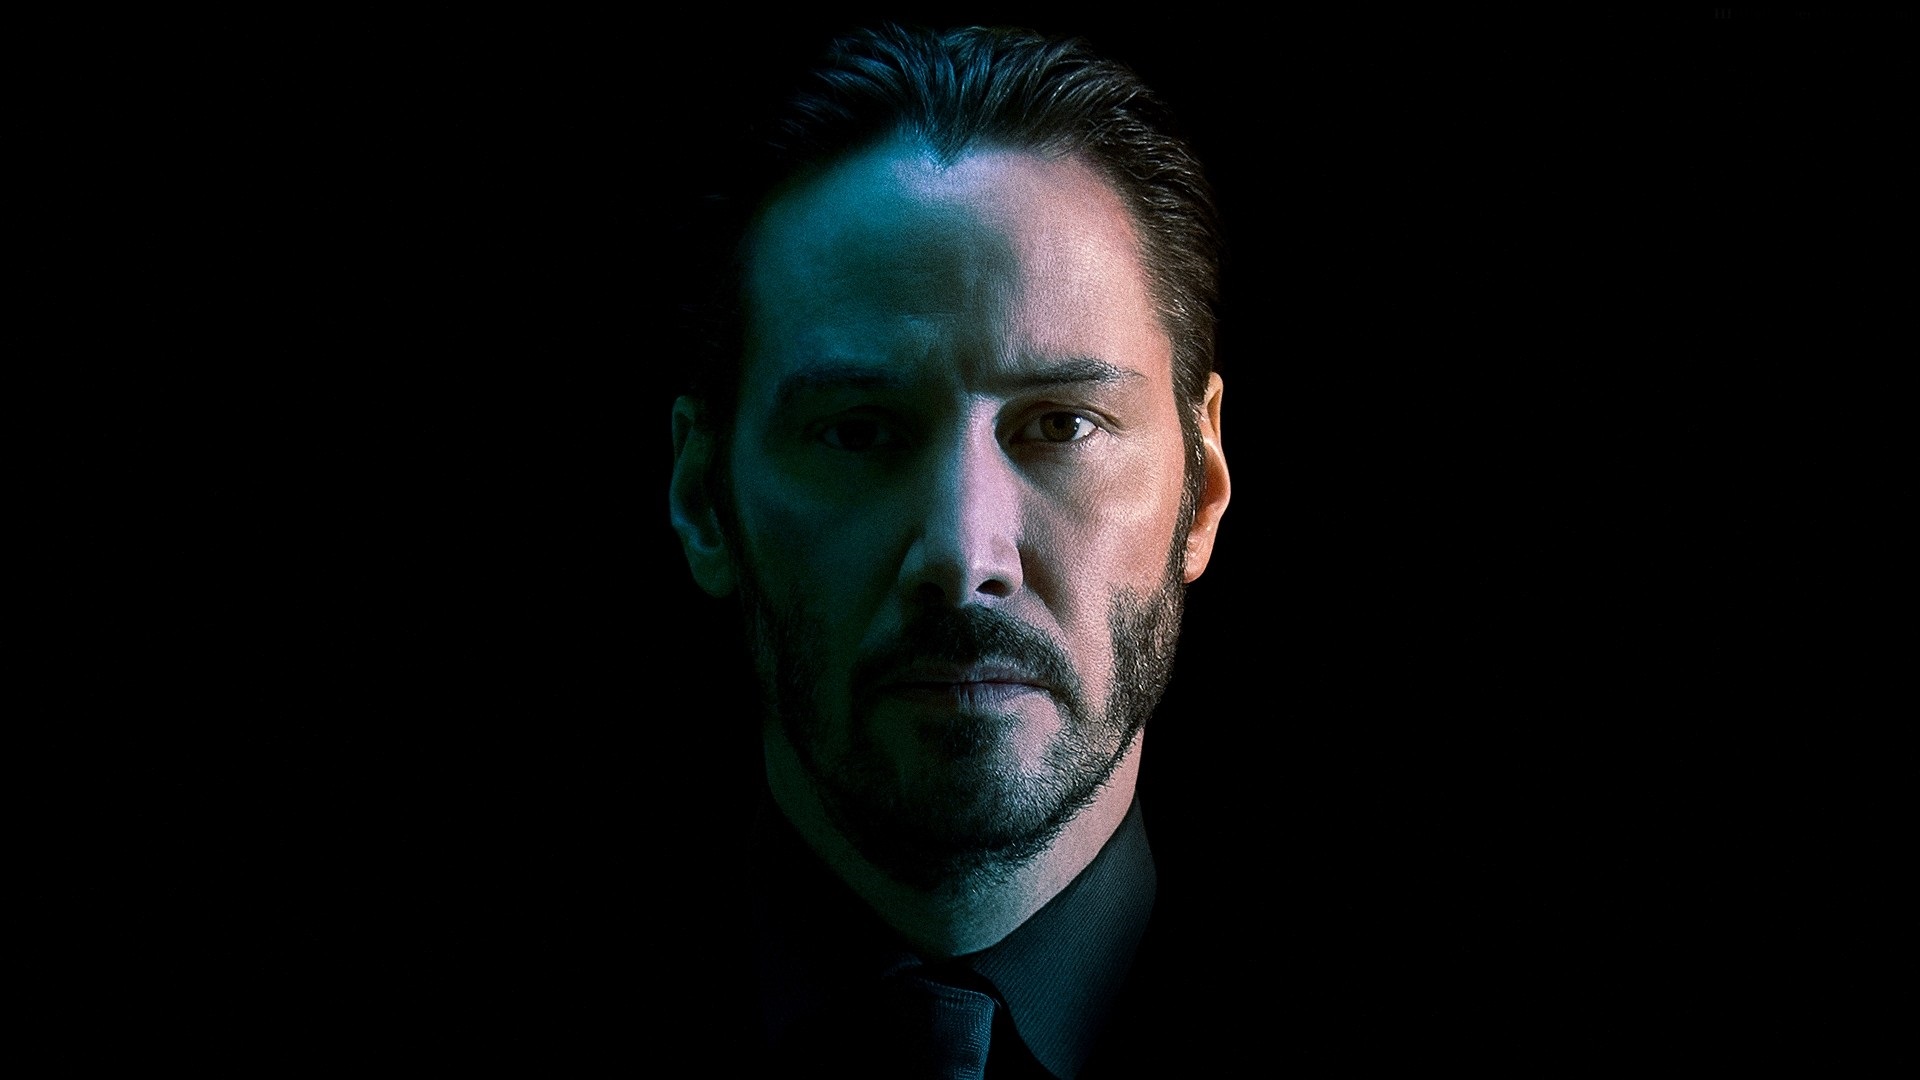 John Wick Wallpapers, Pictures, Images